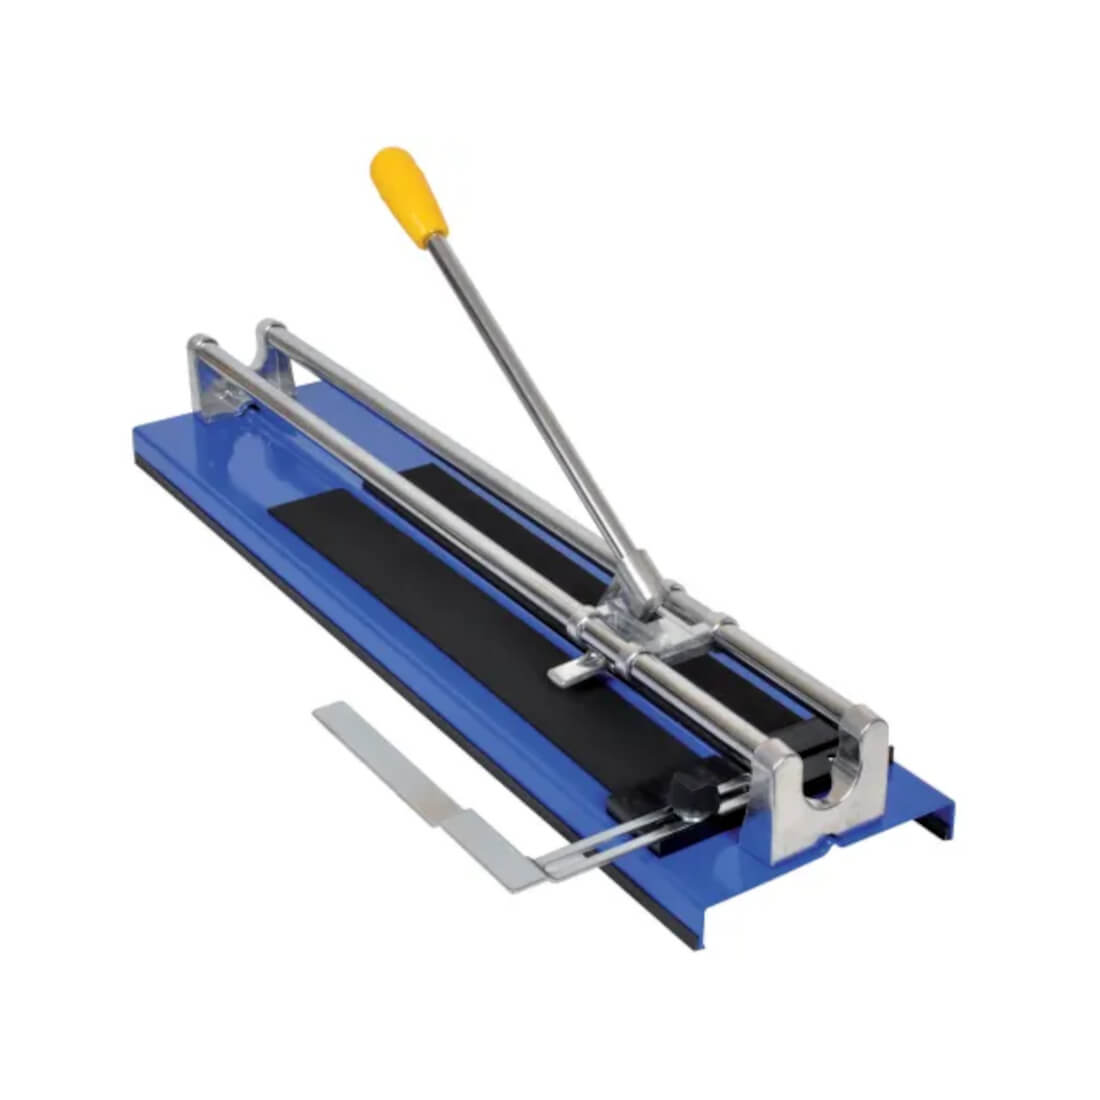 Vitrex Heavy-Duty hand Tile Cutter with a maximum tile length of 500mm